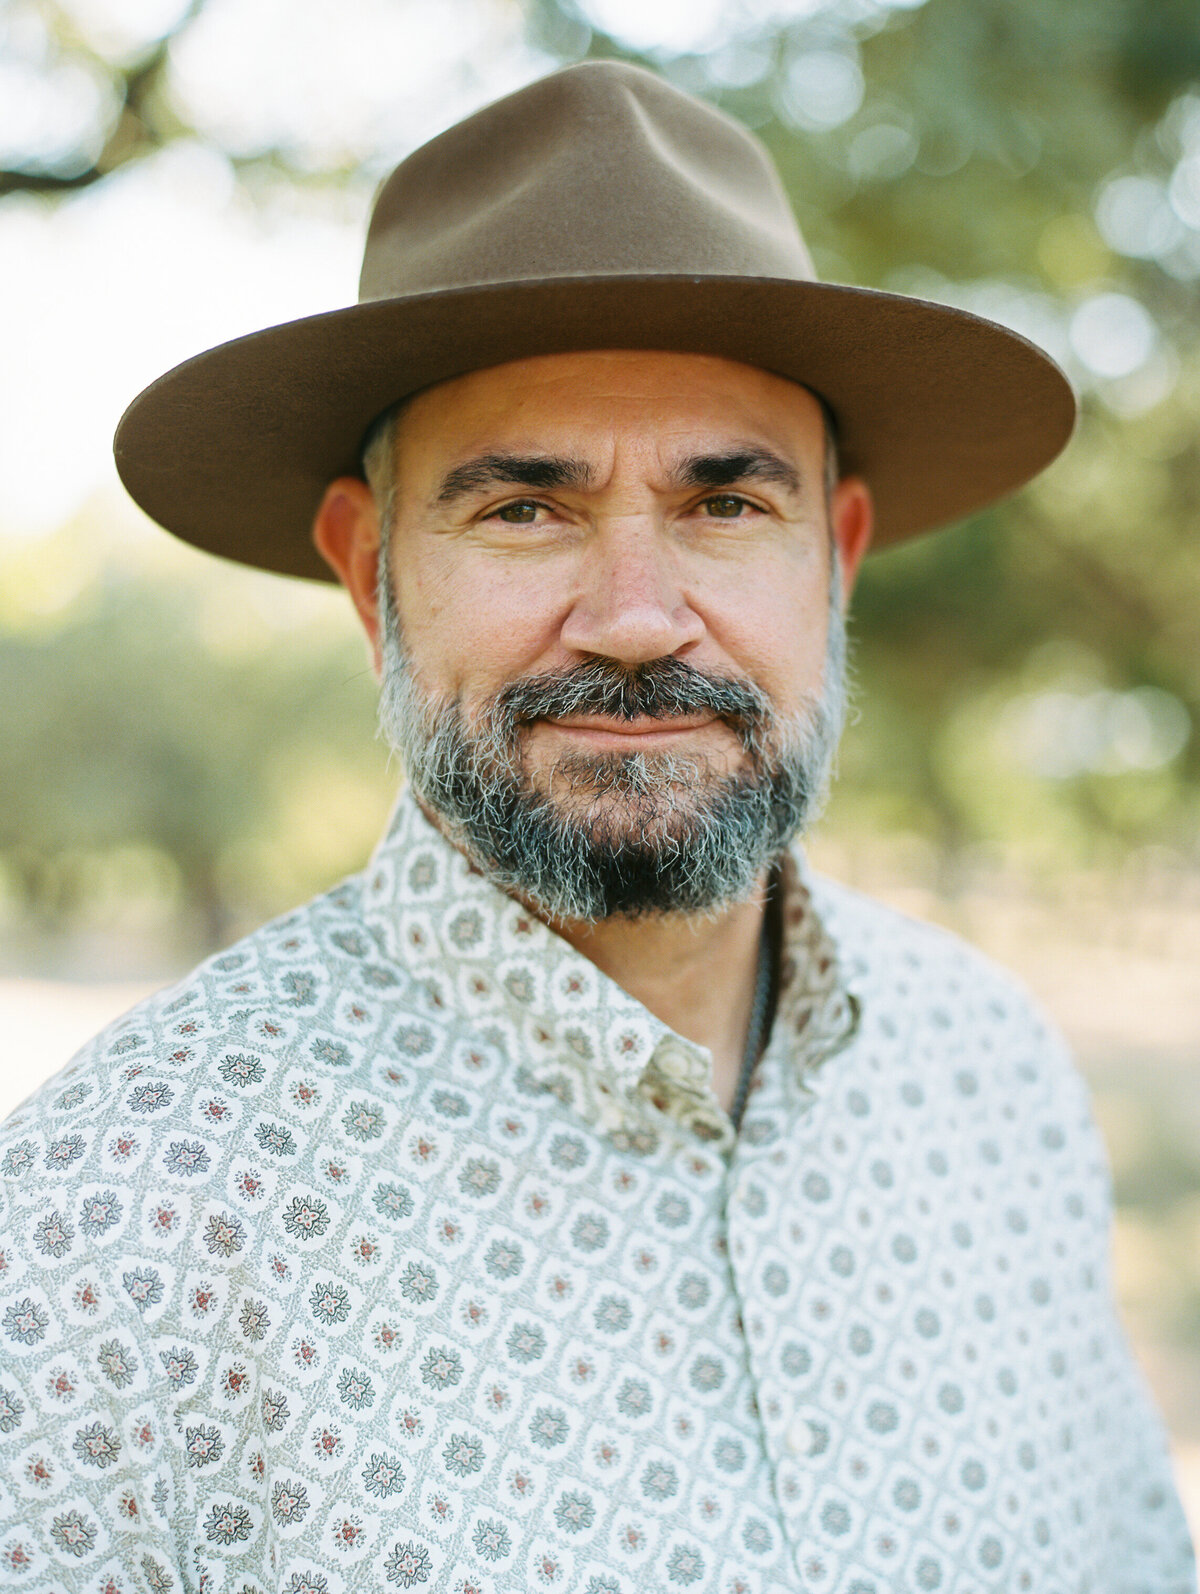 Close up portrait of a man with a beard in a patterned shirt and brown hat